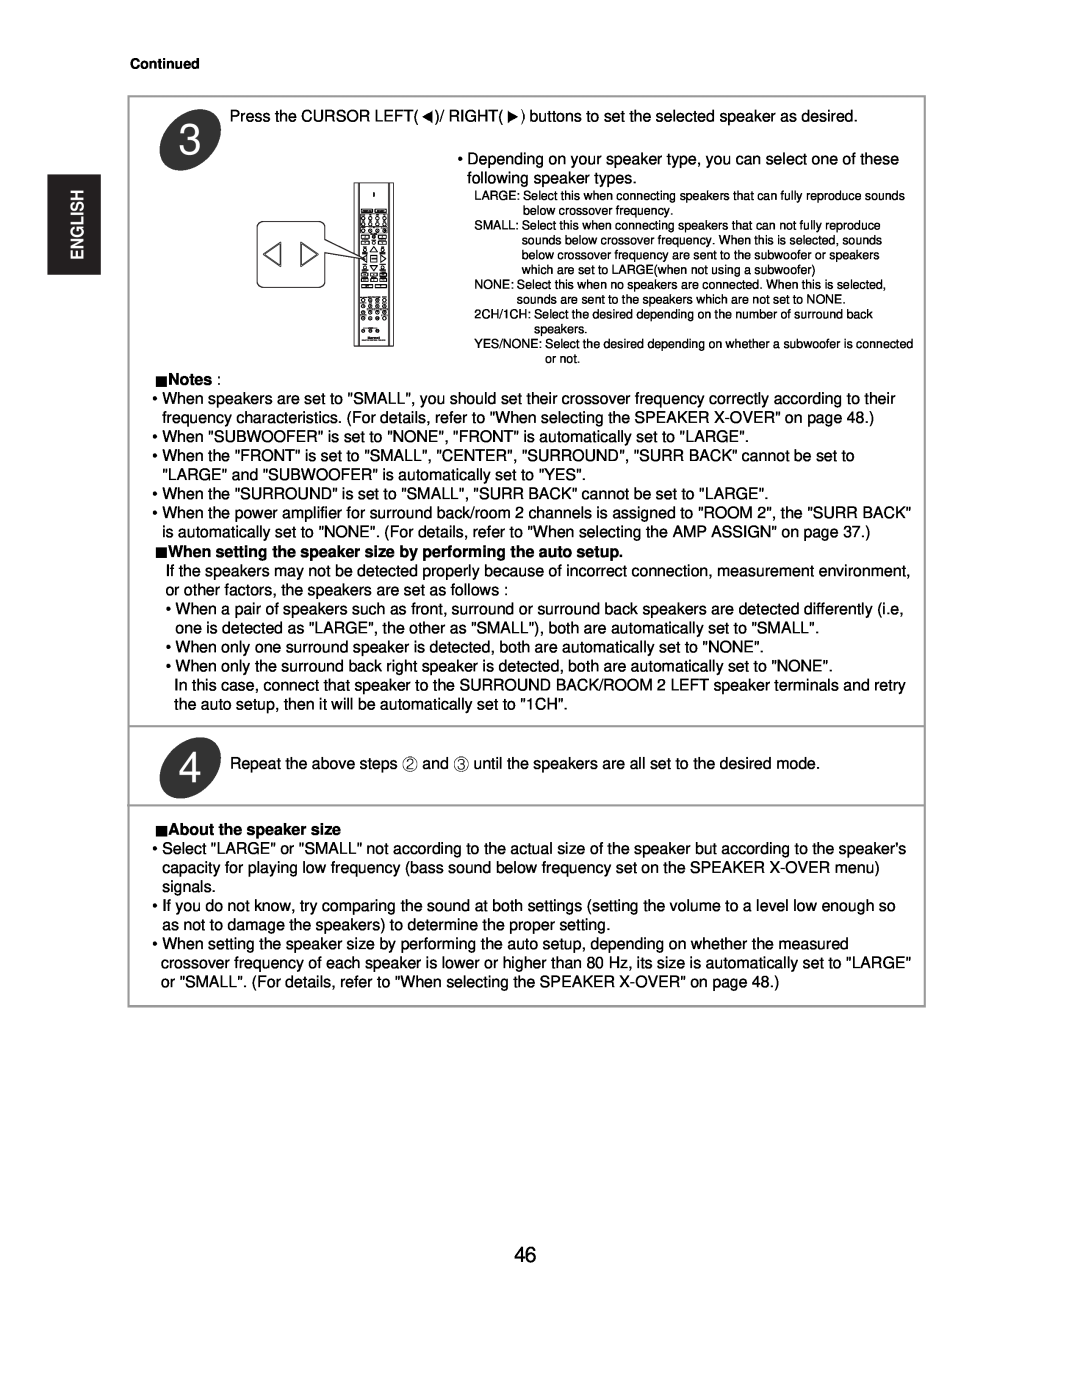 Sherwood R-771 manual About the speaker size, English 